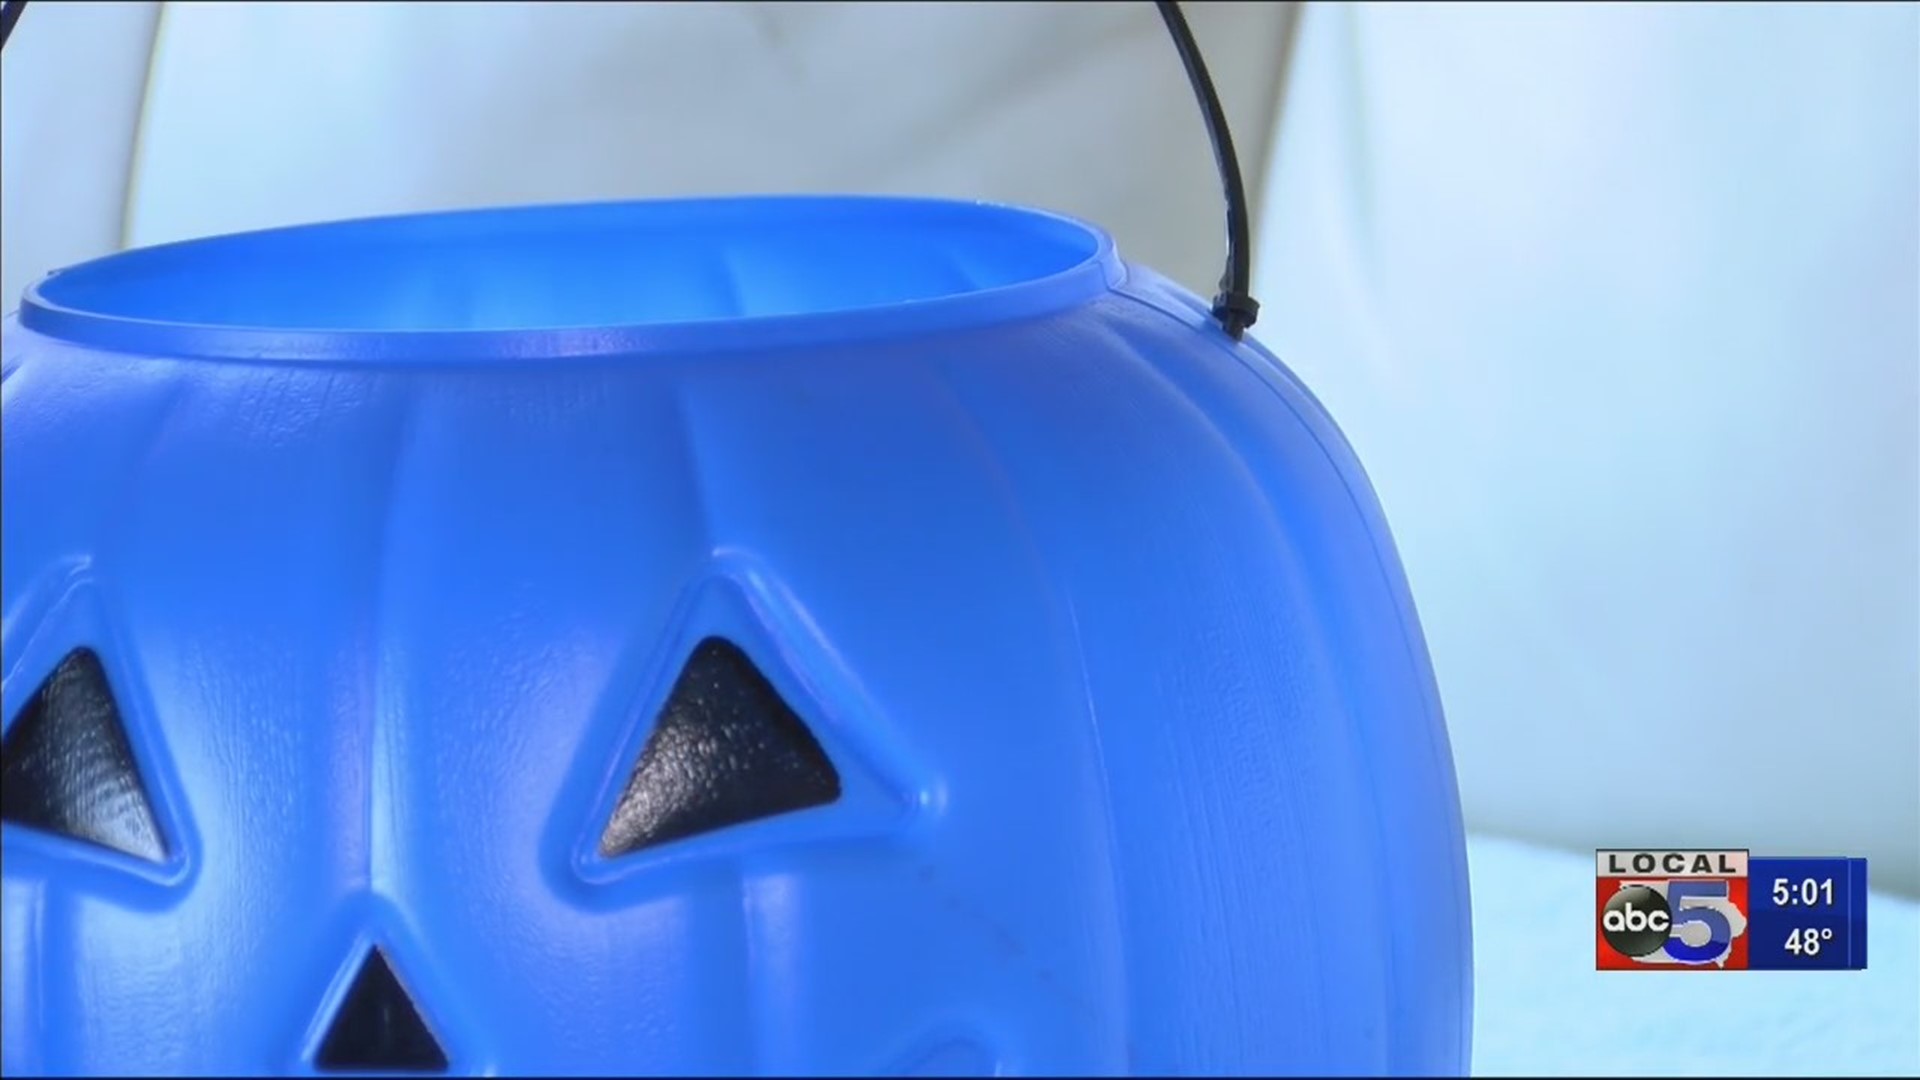 The meaning behind trickortreating with blue buckets